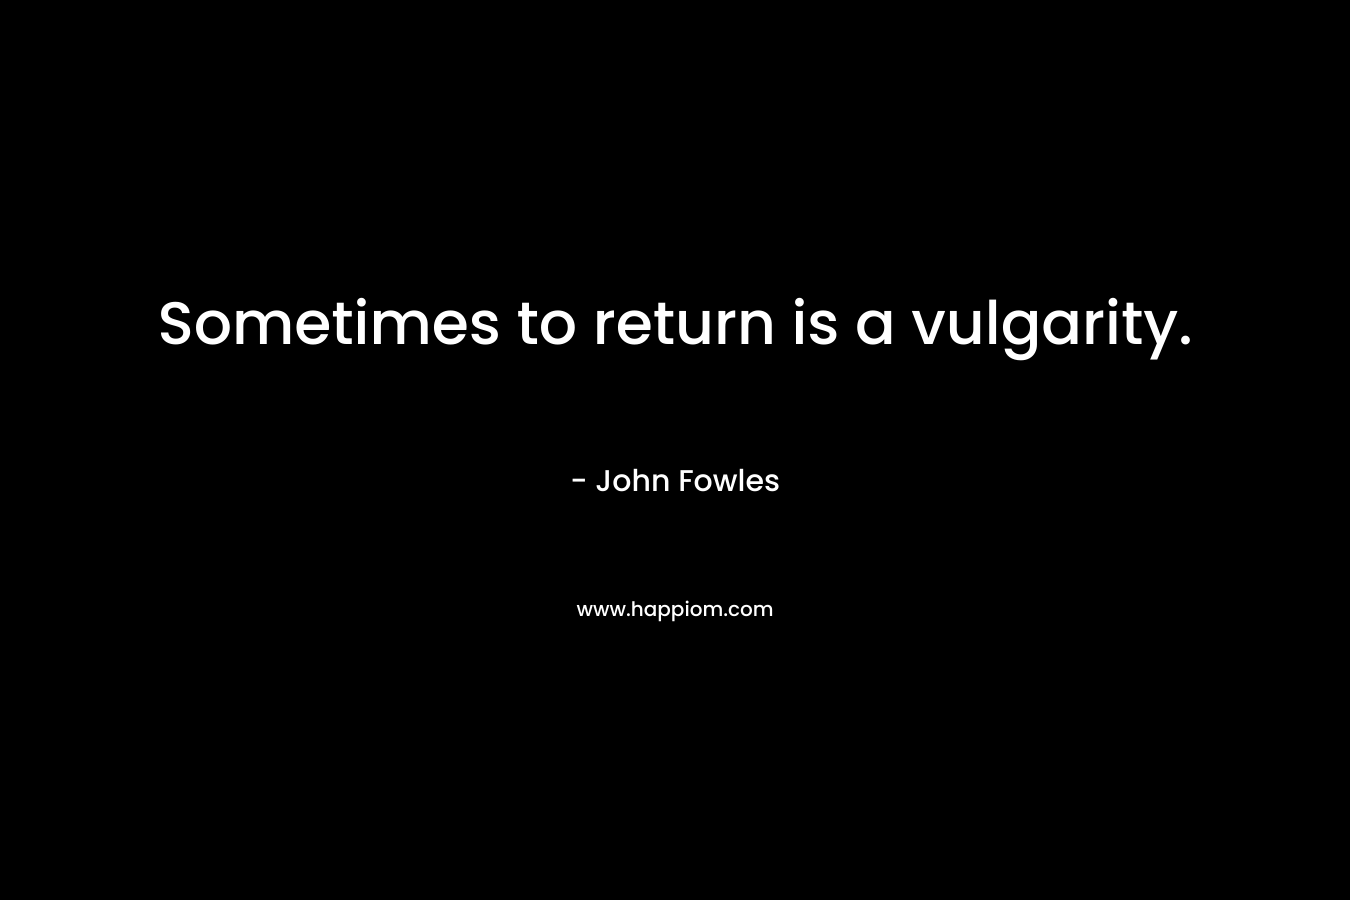 Sometimes to return is a vulgarity.